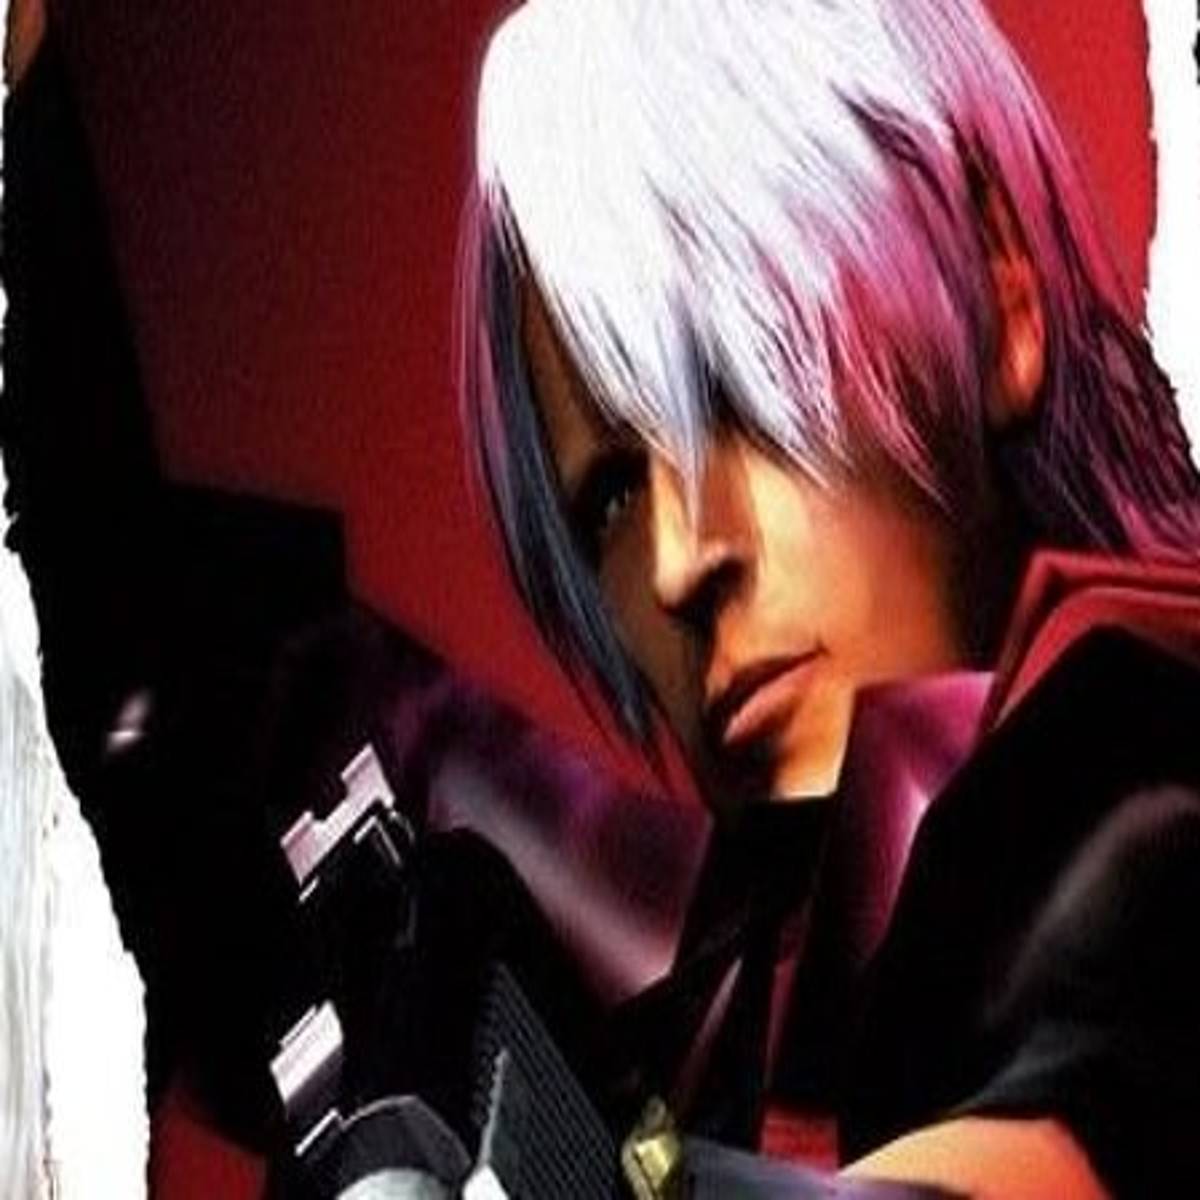 DMC Devil May Cry  HD Collection trailer (2012) Dante is back 